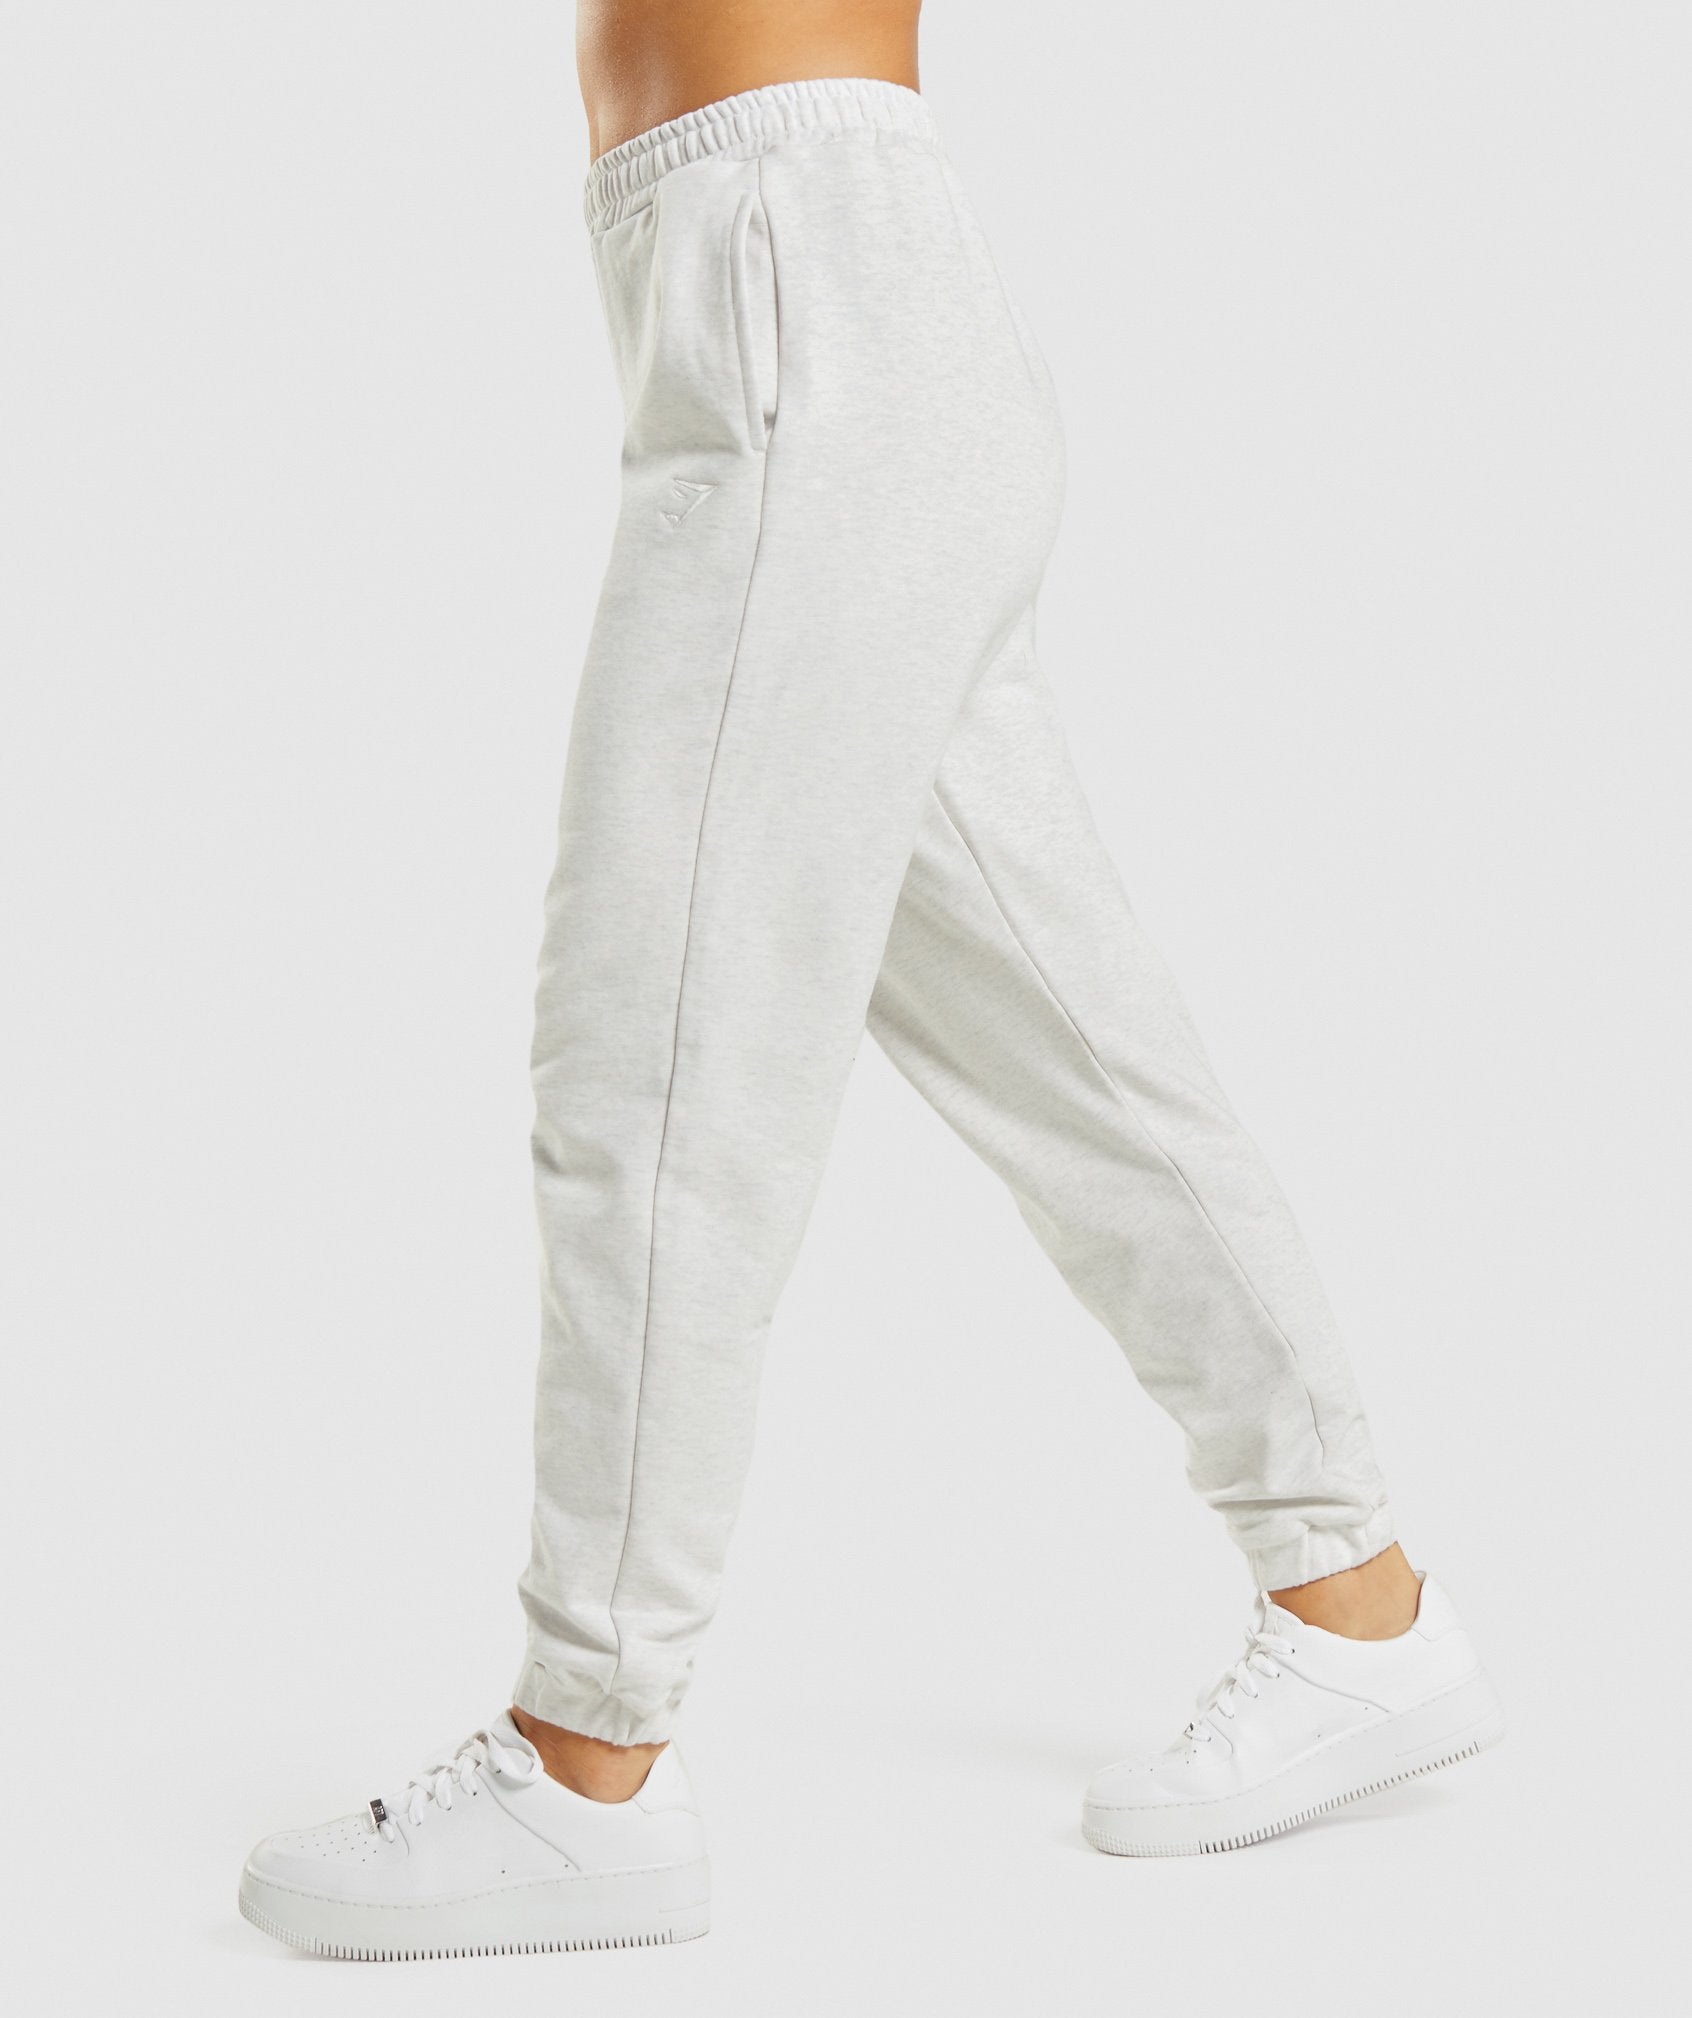 Rest Day Sweats Joggers in White Marl - view 3